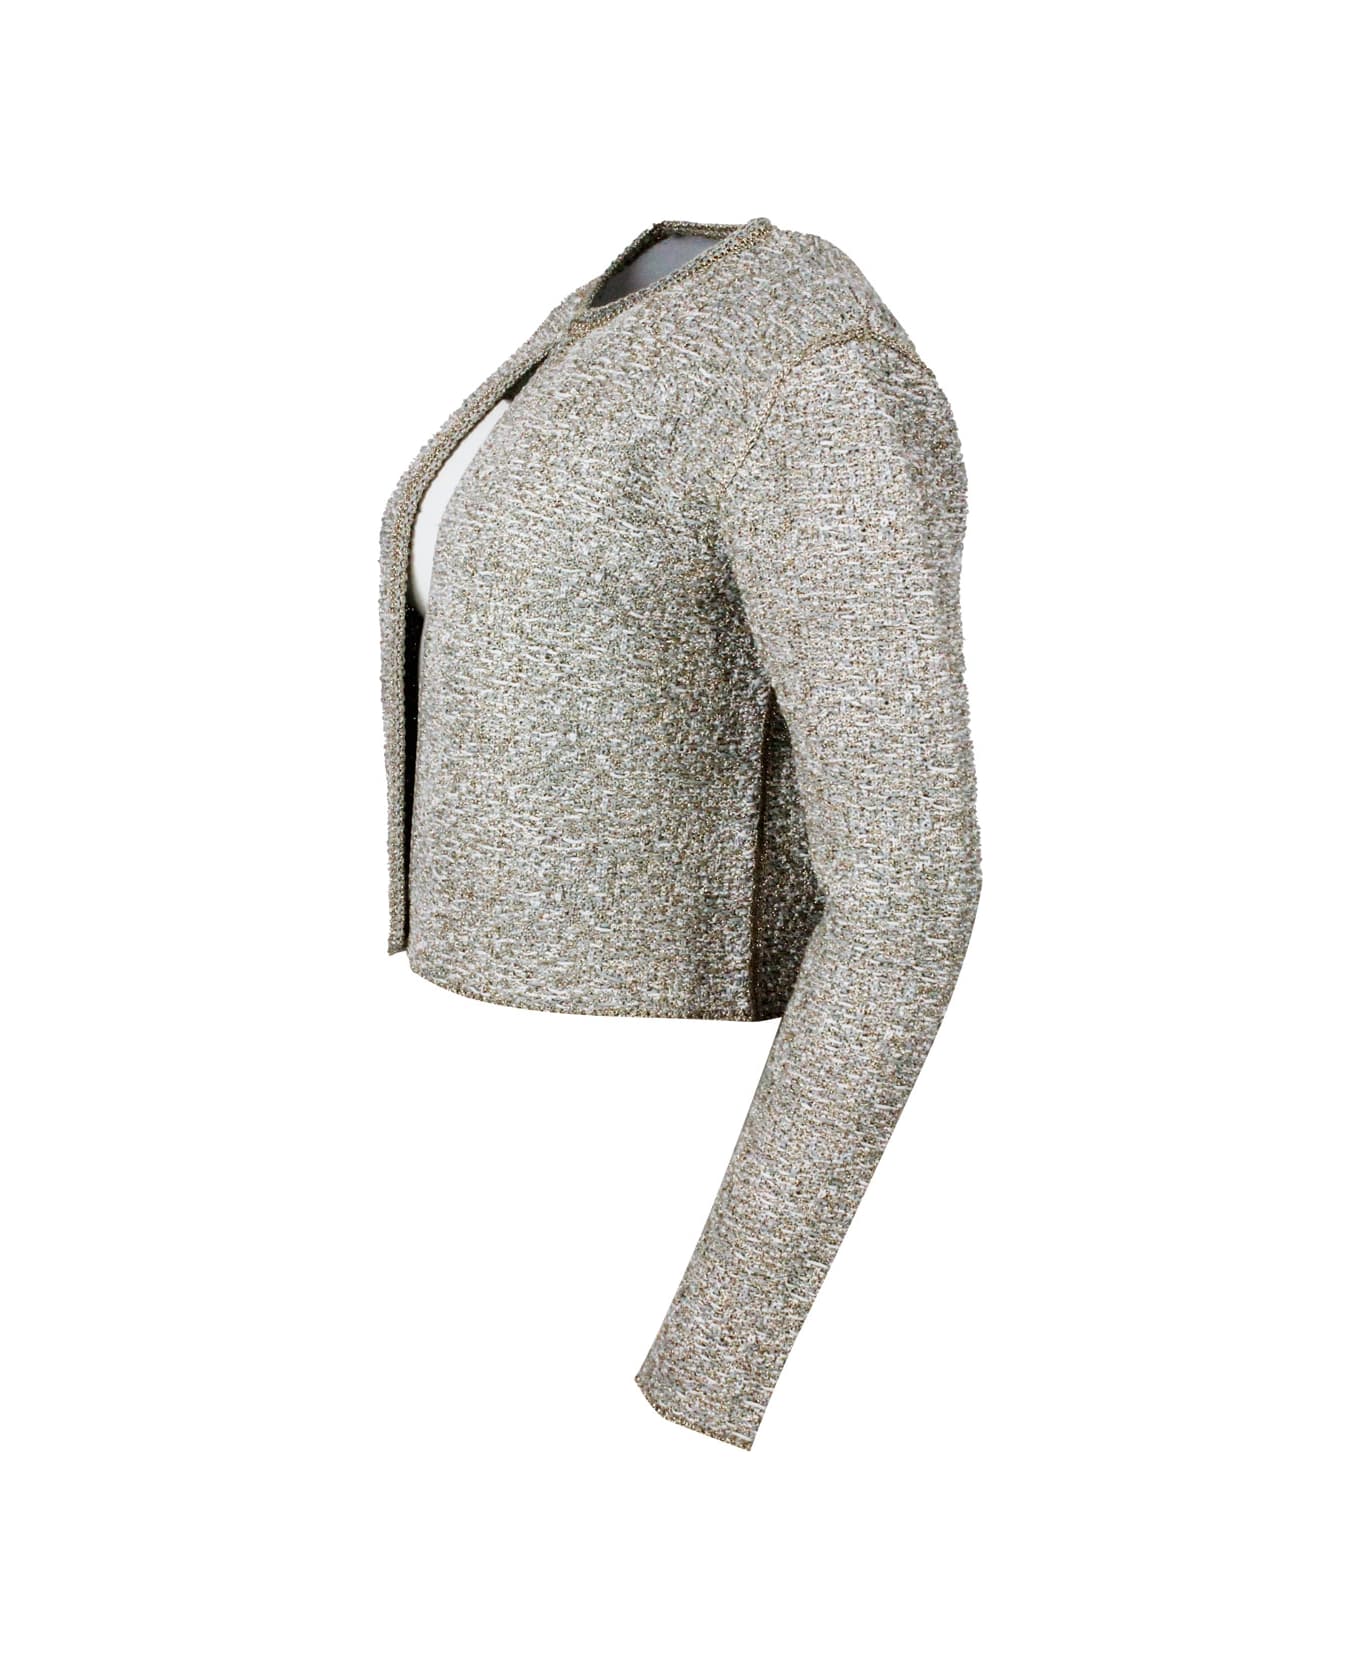 Fabiana Filippi Chanel-style Jacket Sweater Open On The Front And With Hook Closure Embellished With Bright Lurex Threads - Grigio chiaro/bianco/oro カーディガン